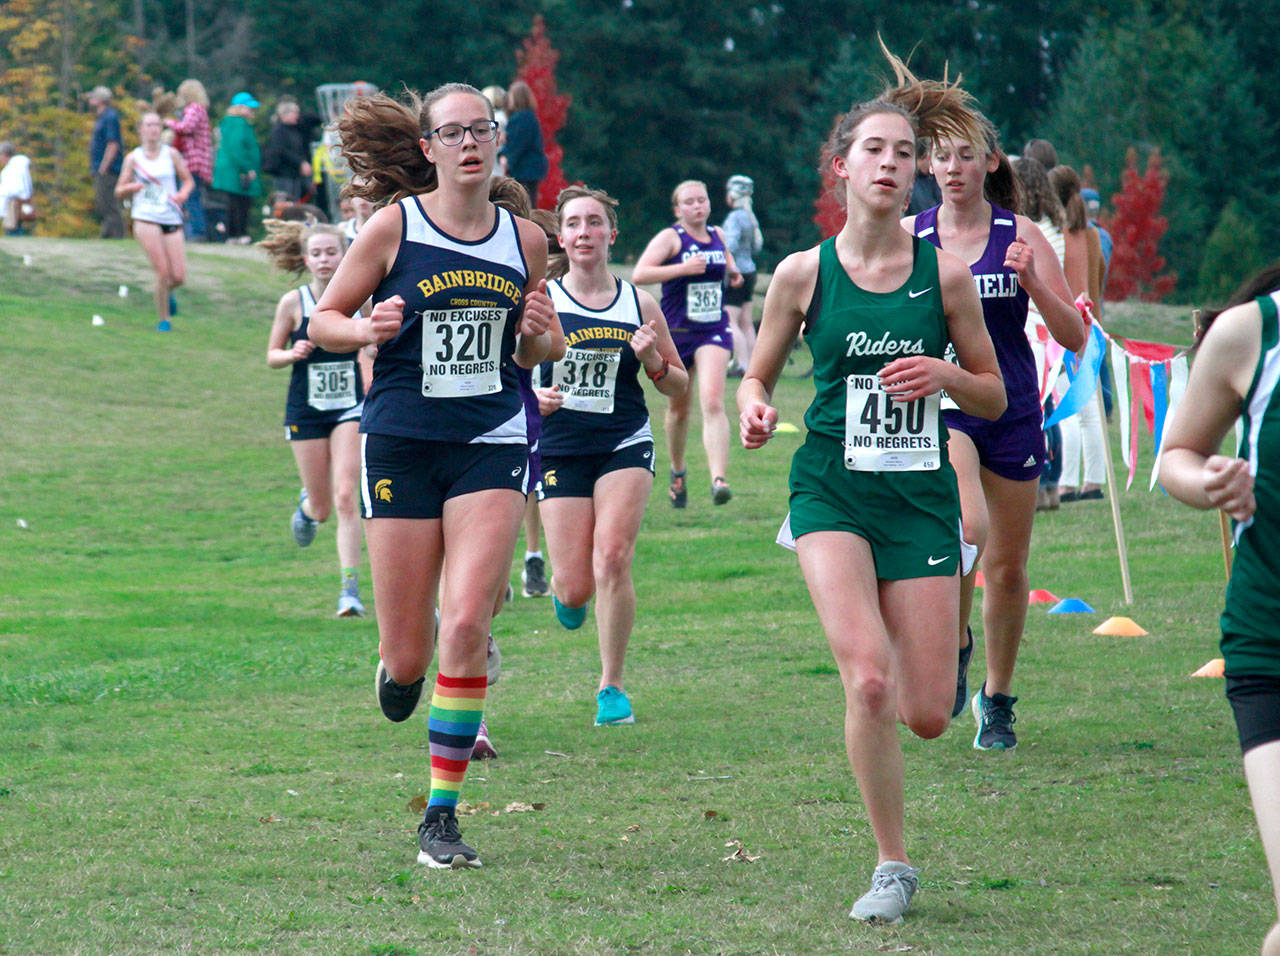 Luciano Marano | Bainbridge Island Review - Runners from four high schools converged on Battle Point Park recently for the Bainbridge High School cross country team’s sole home meet of the season.